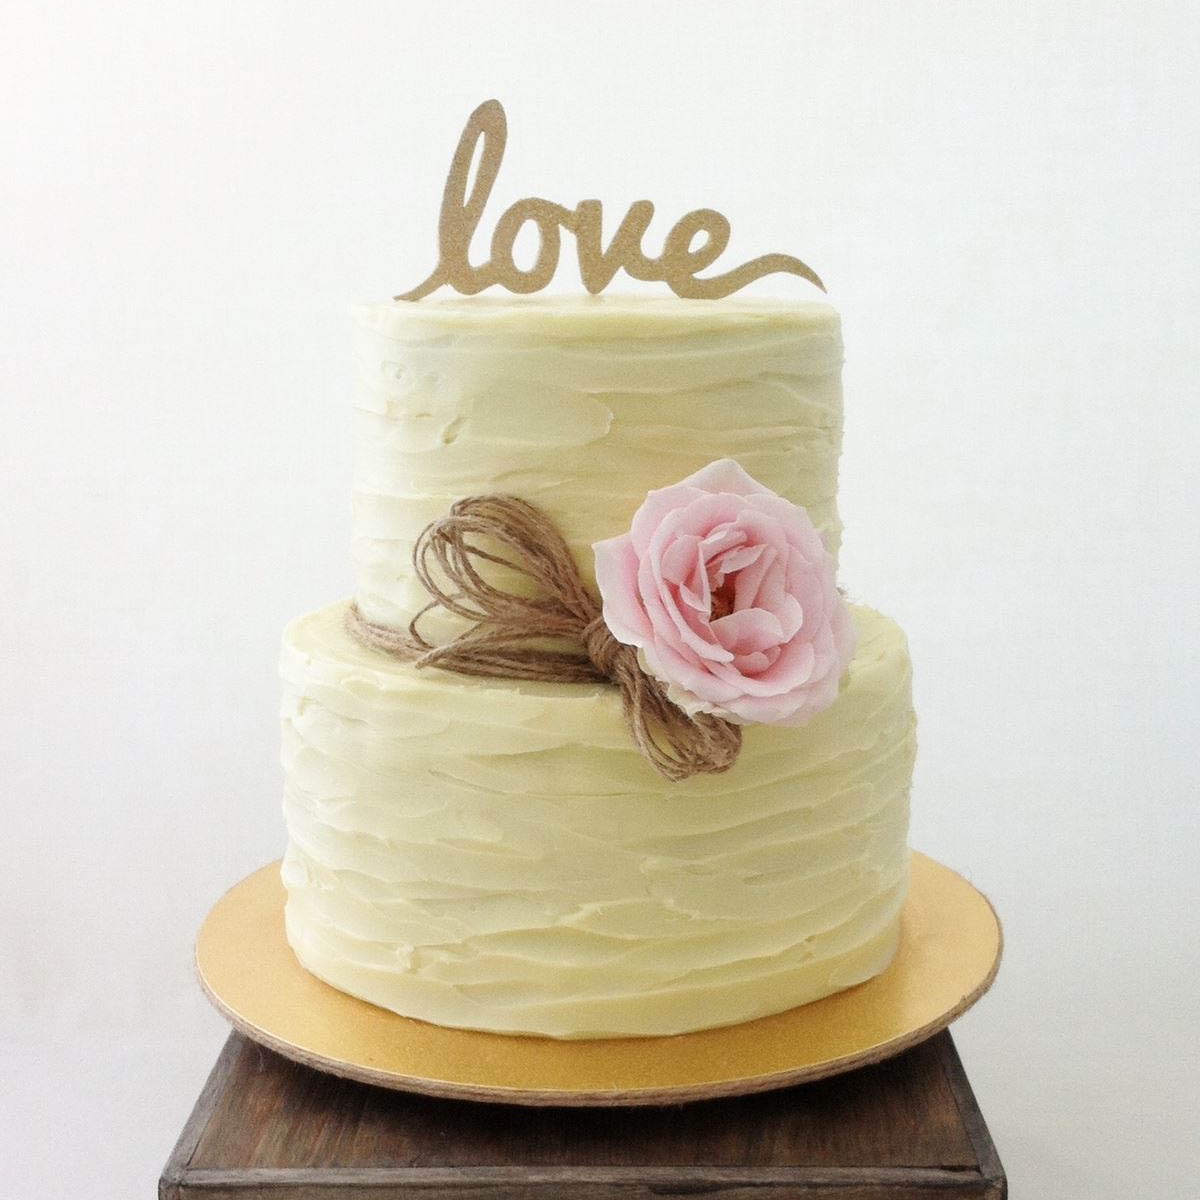 Nikah Cakes » Once Upon A Cake